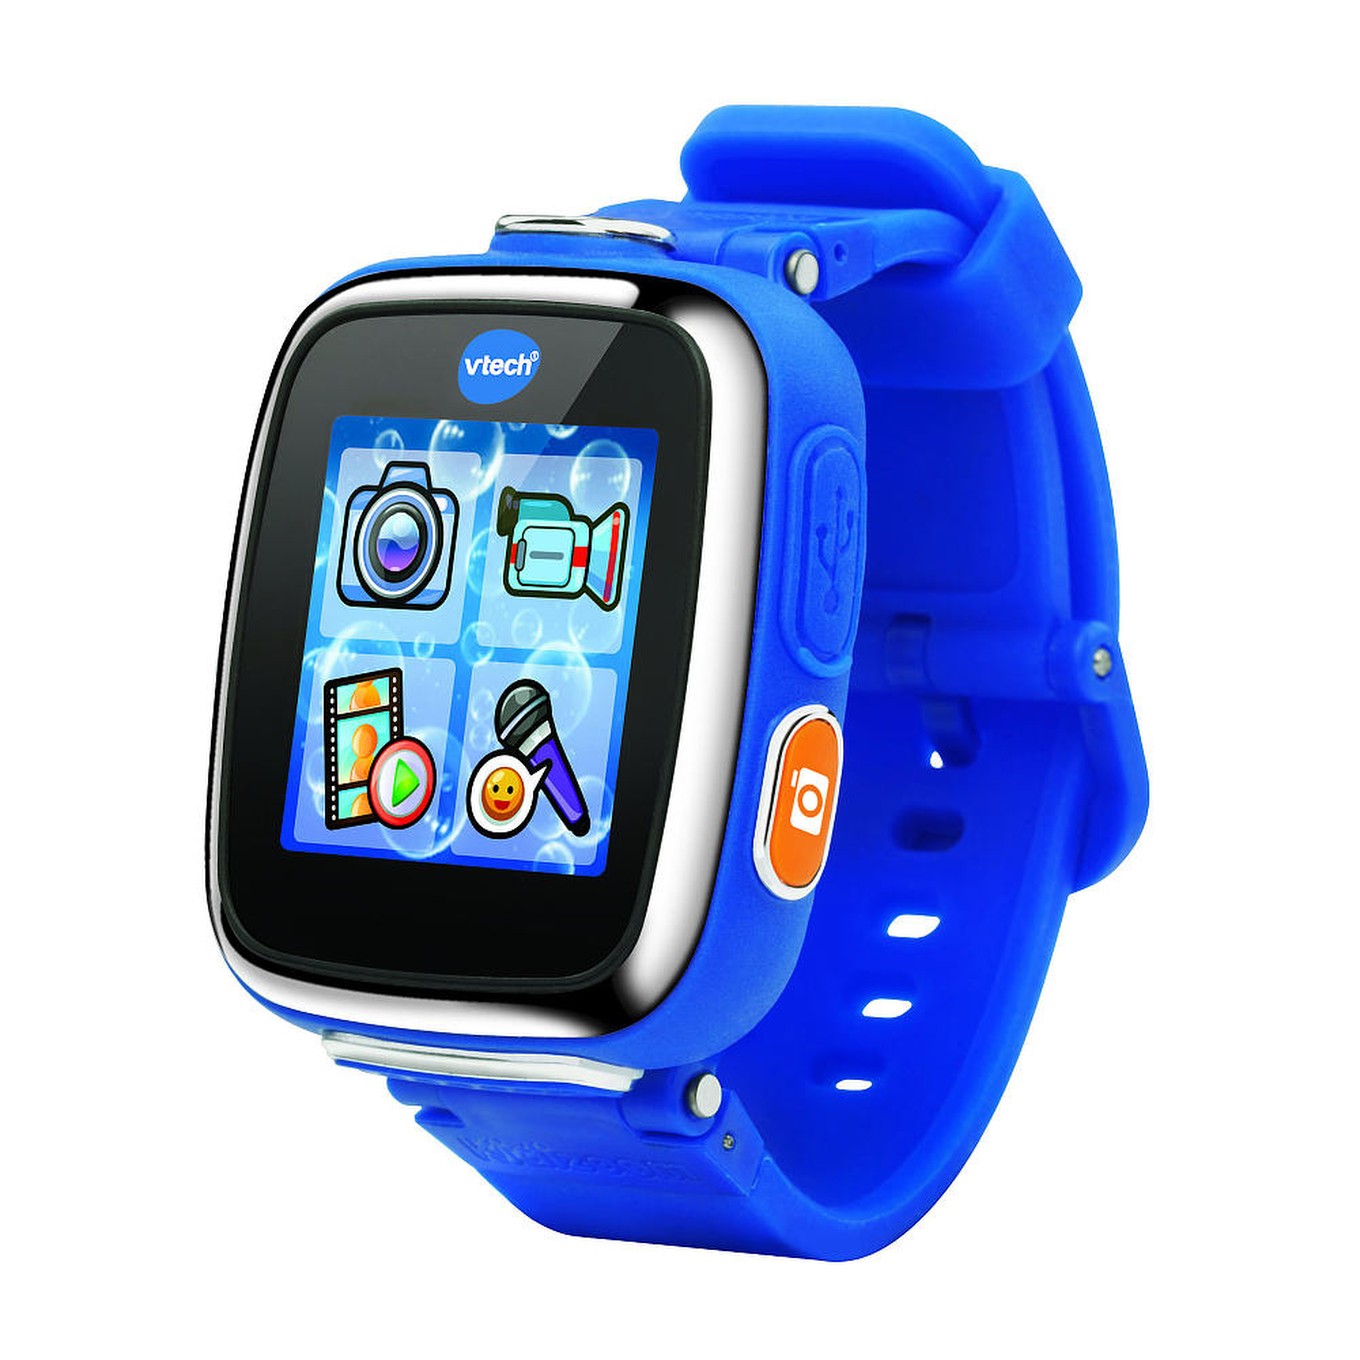 vtech watch download games free